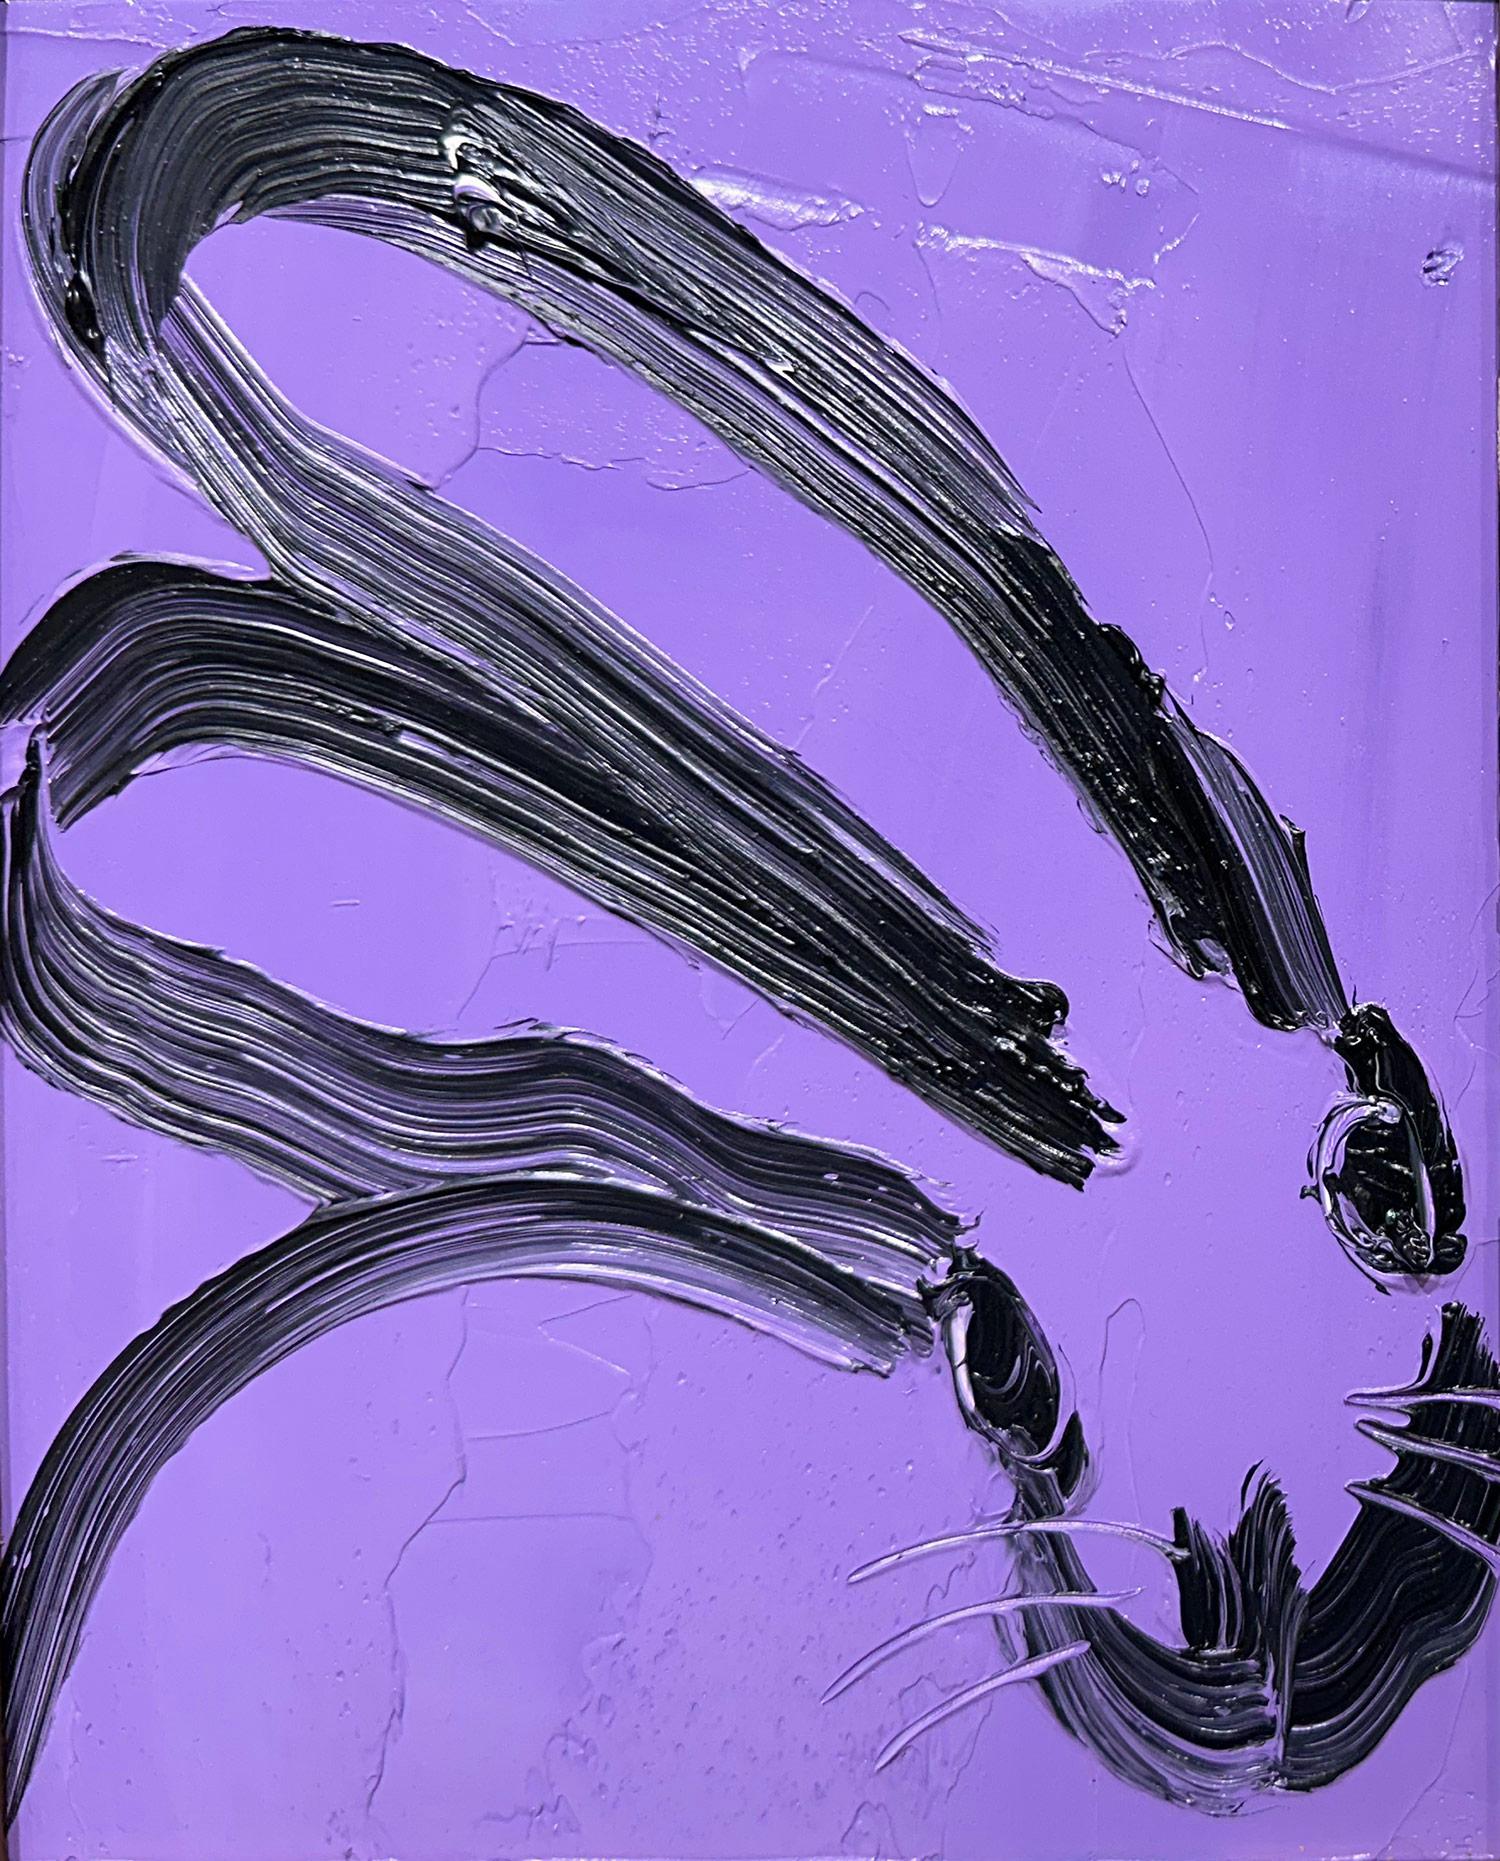 A wonderful composition of one of Slonem's most iconic subjects, Bunnies. This piece depicts a gestural figure of a black bunny on a Purple Lavender background with thick use of paint. It is housed in a wonderful black frame with silver details.